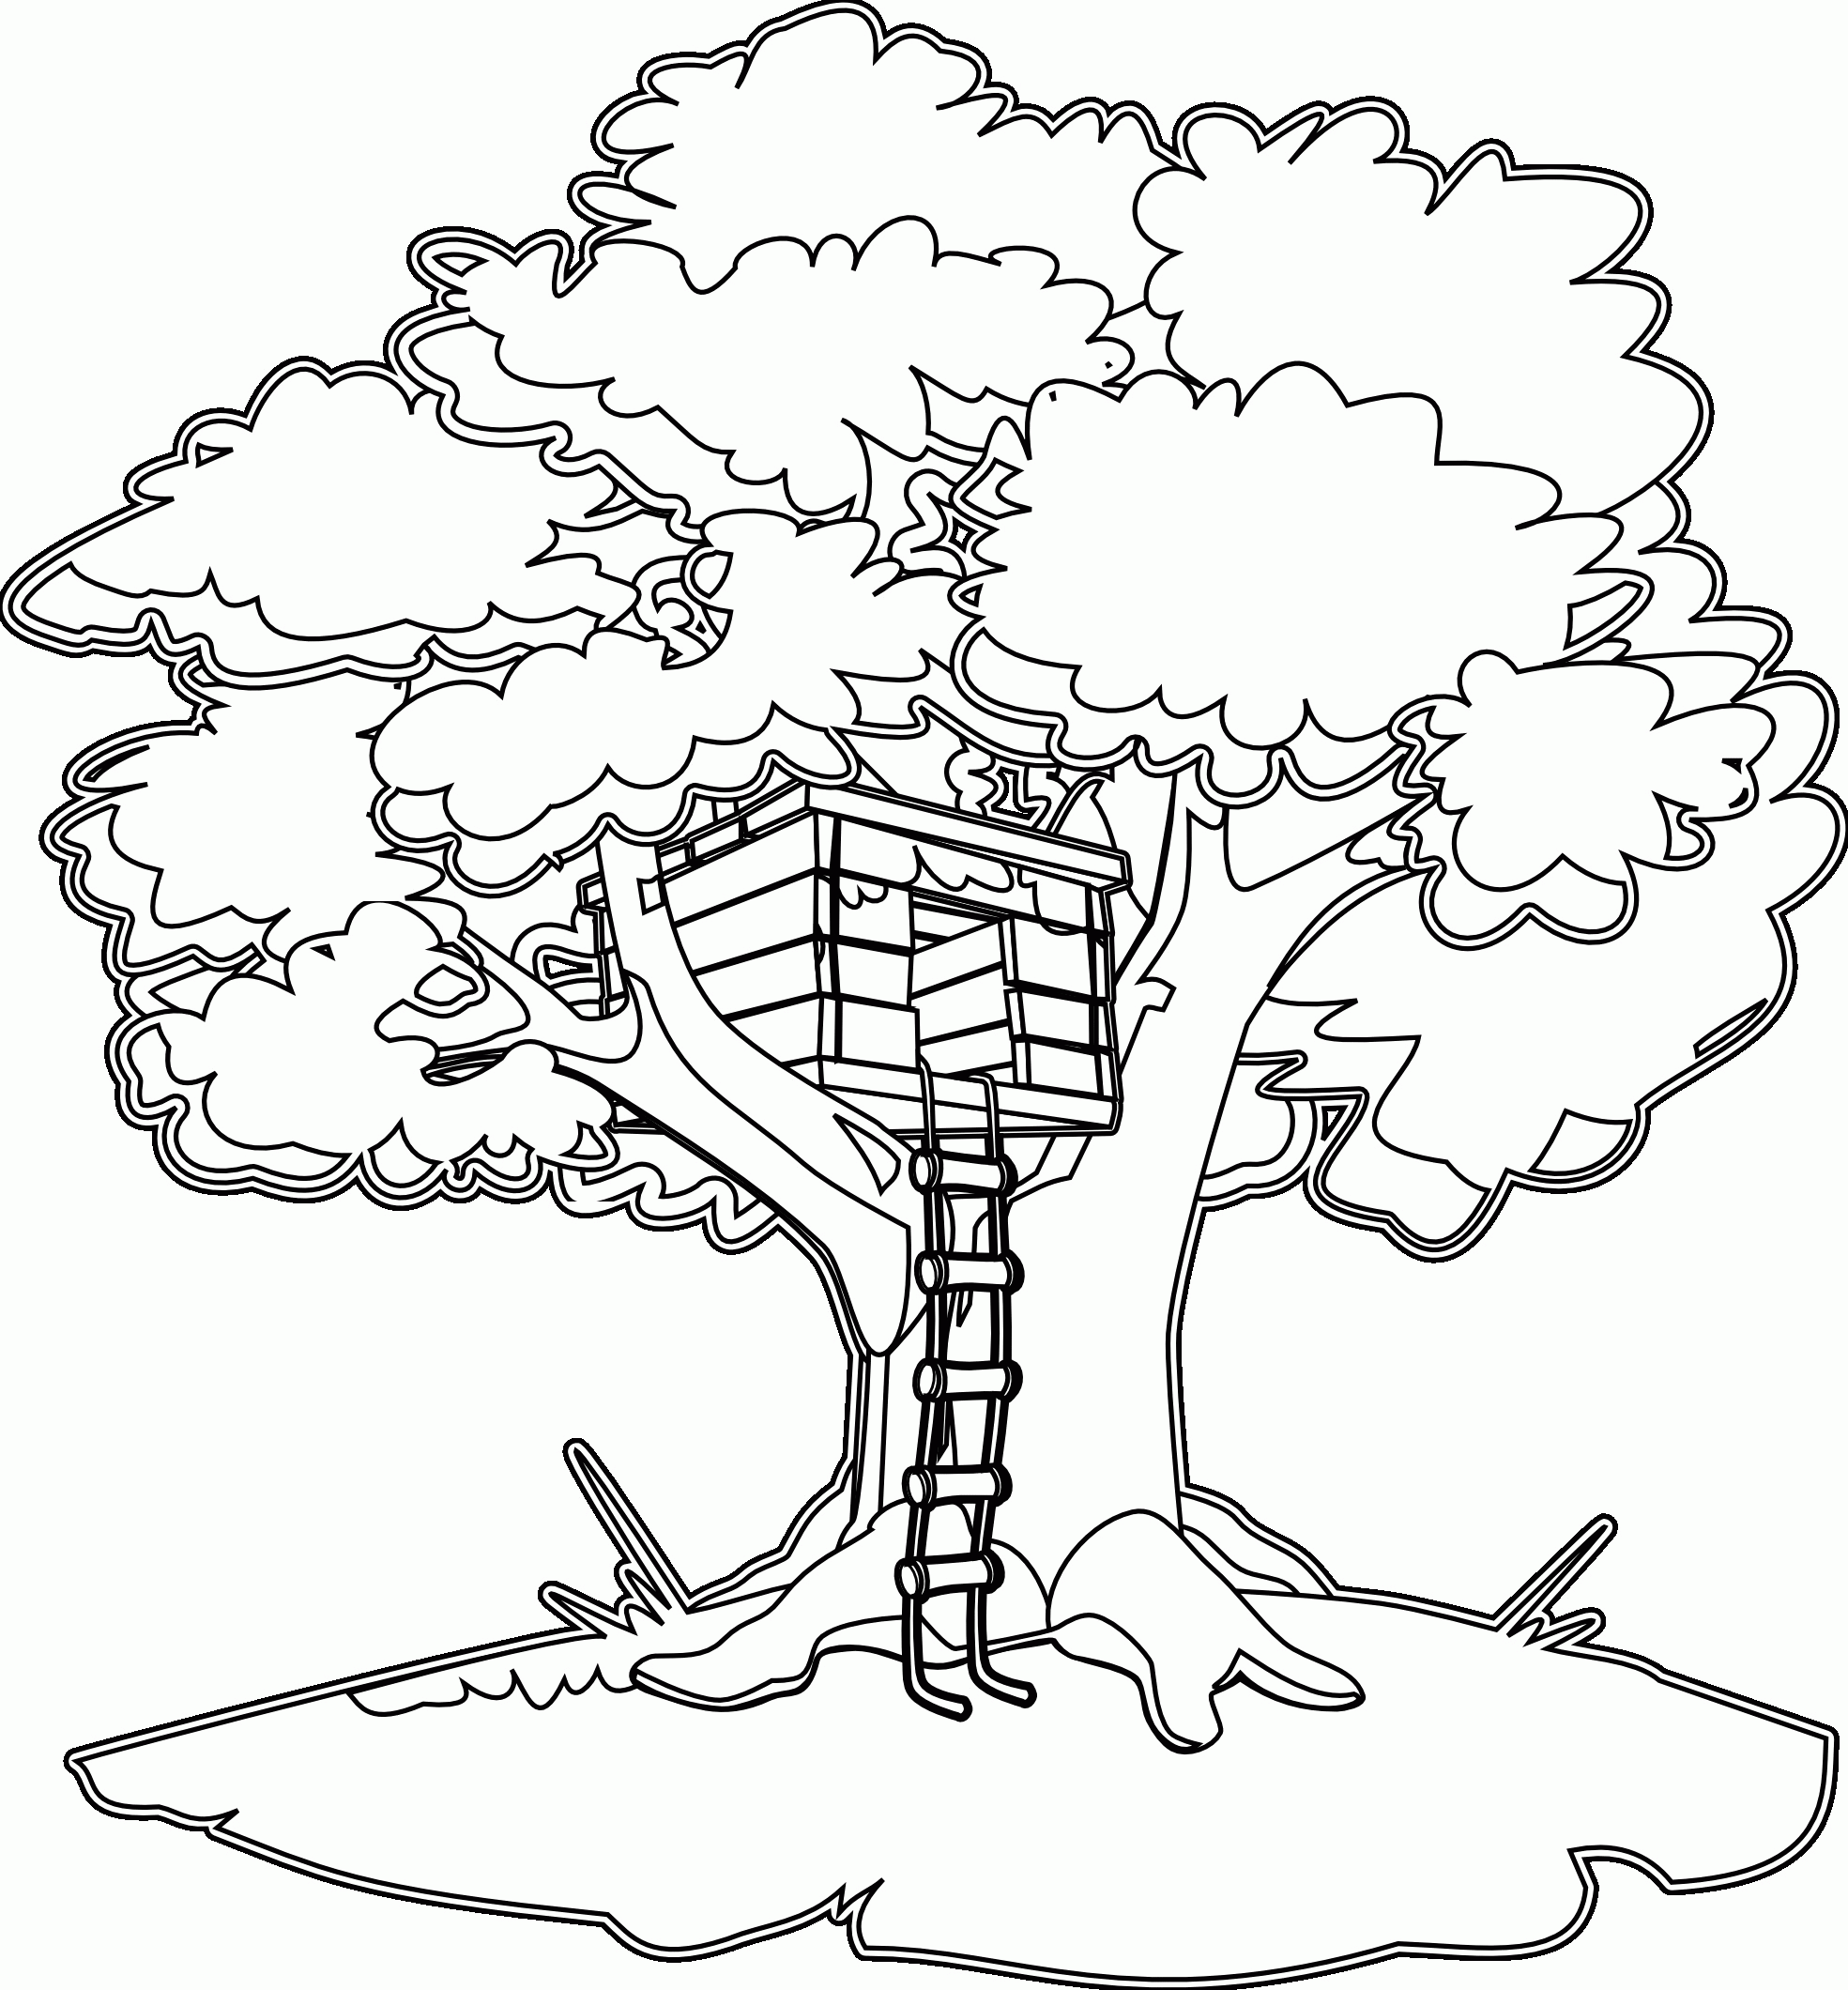 Free Tree House Coloring Pages - Coloring Home